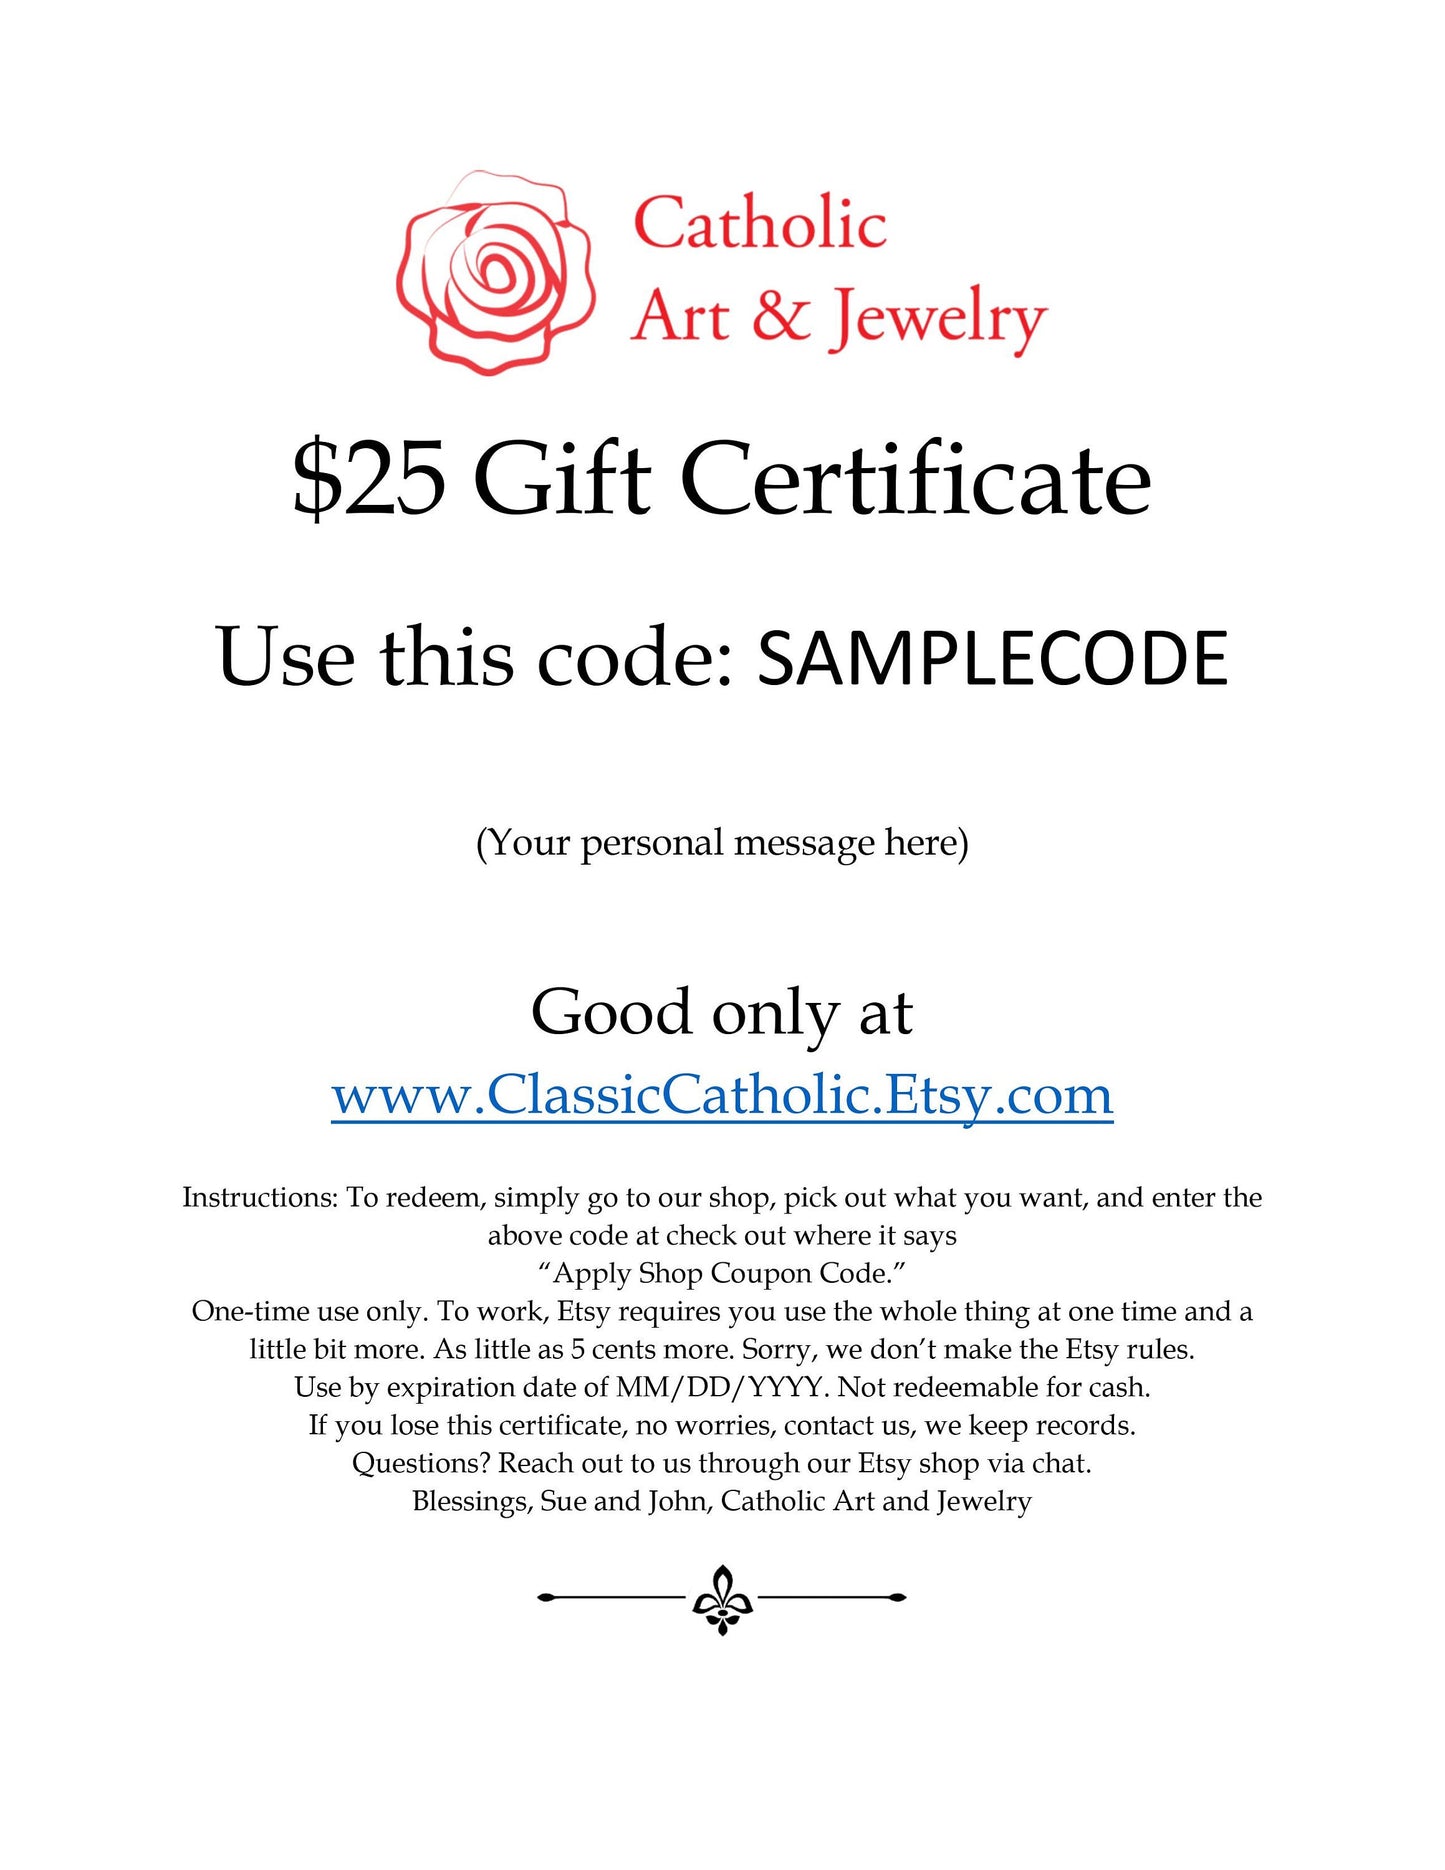 25 Dollar Gift Certificate Only Redeemable in our shop, ClassicCatholic